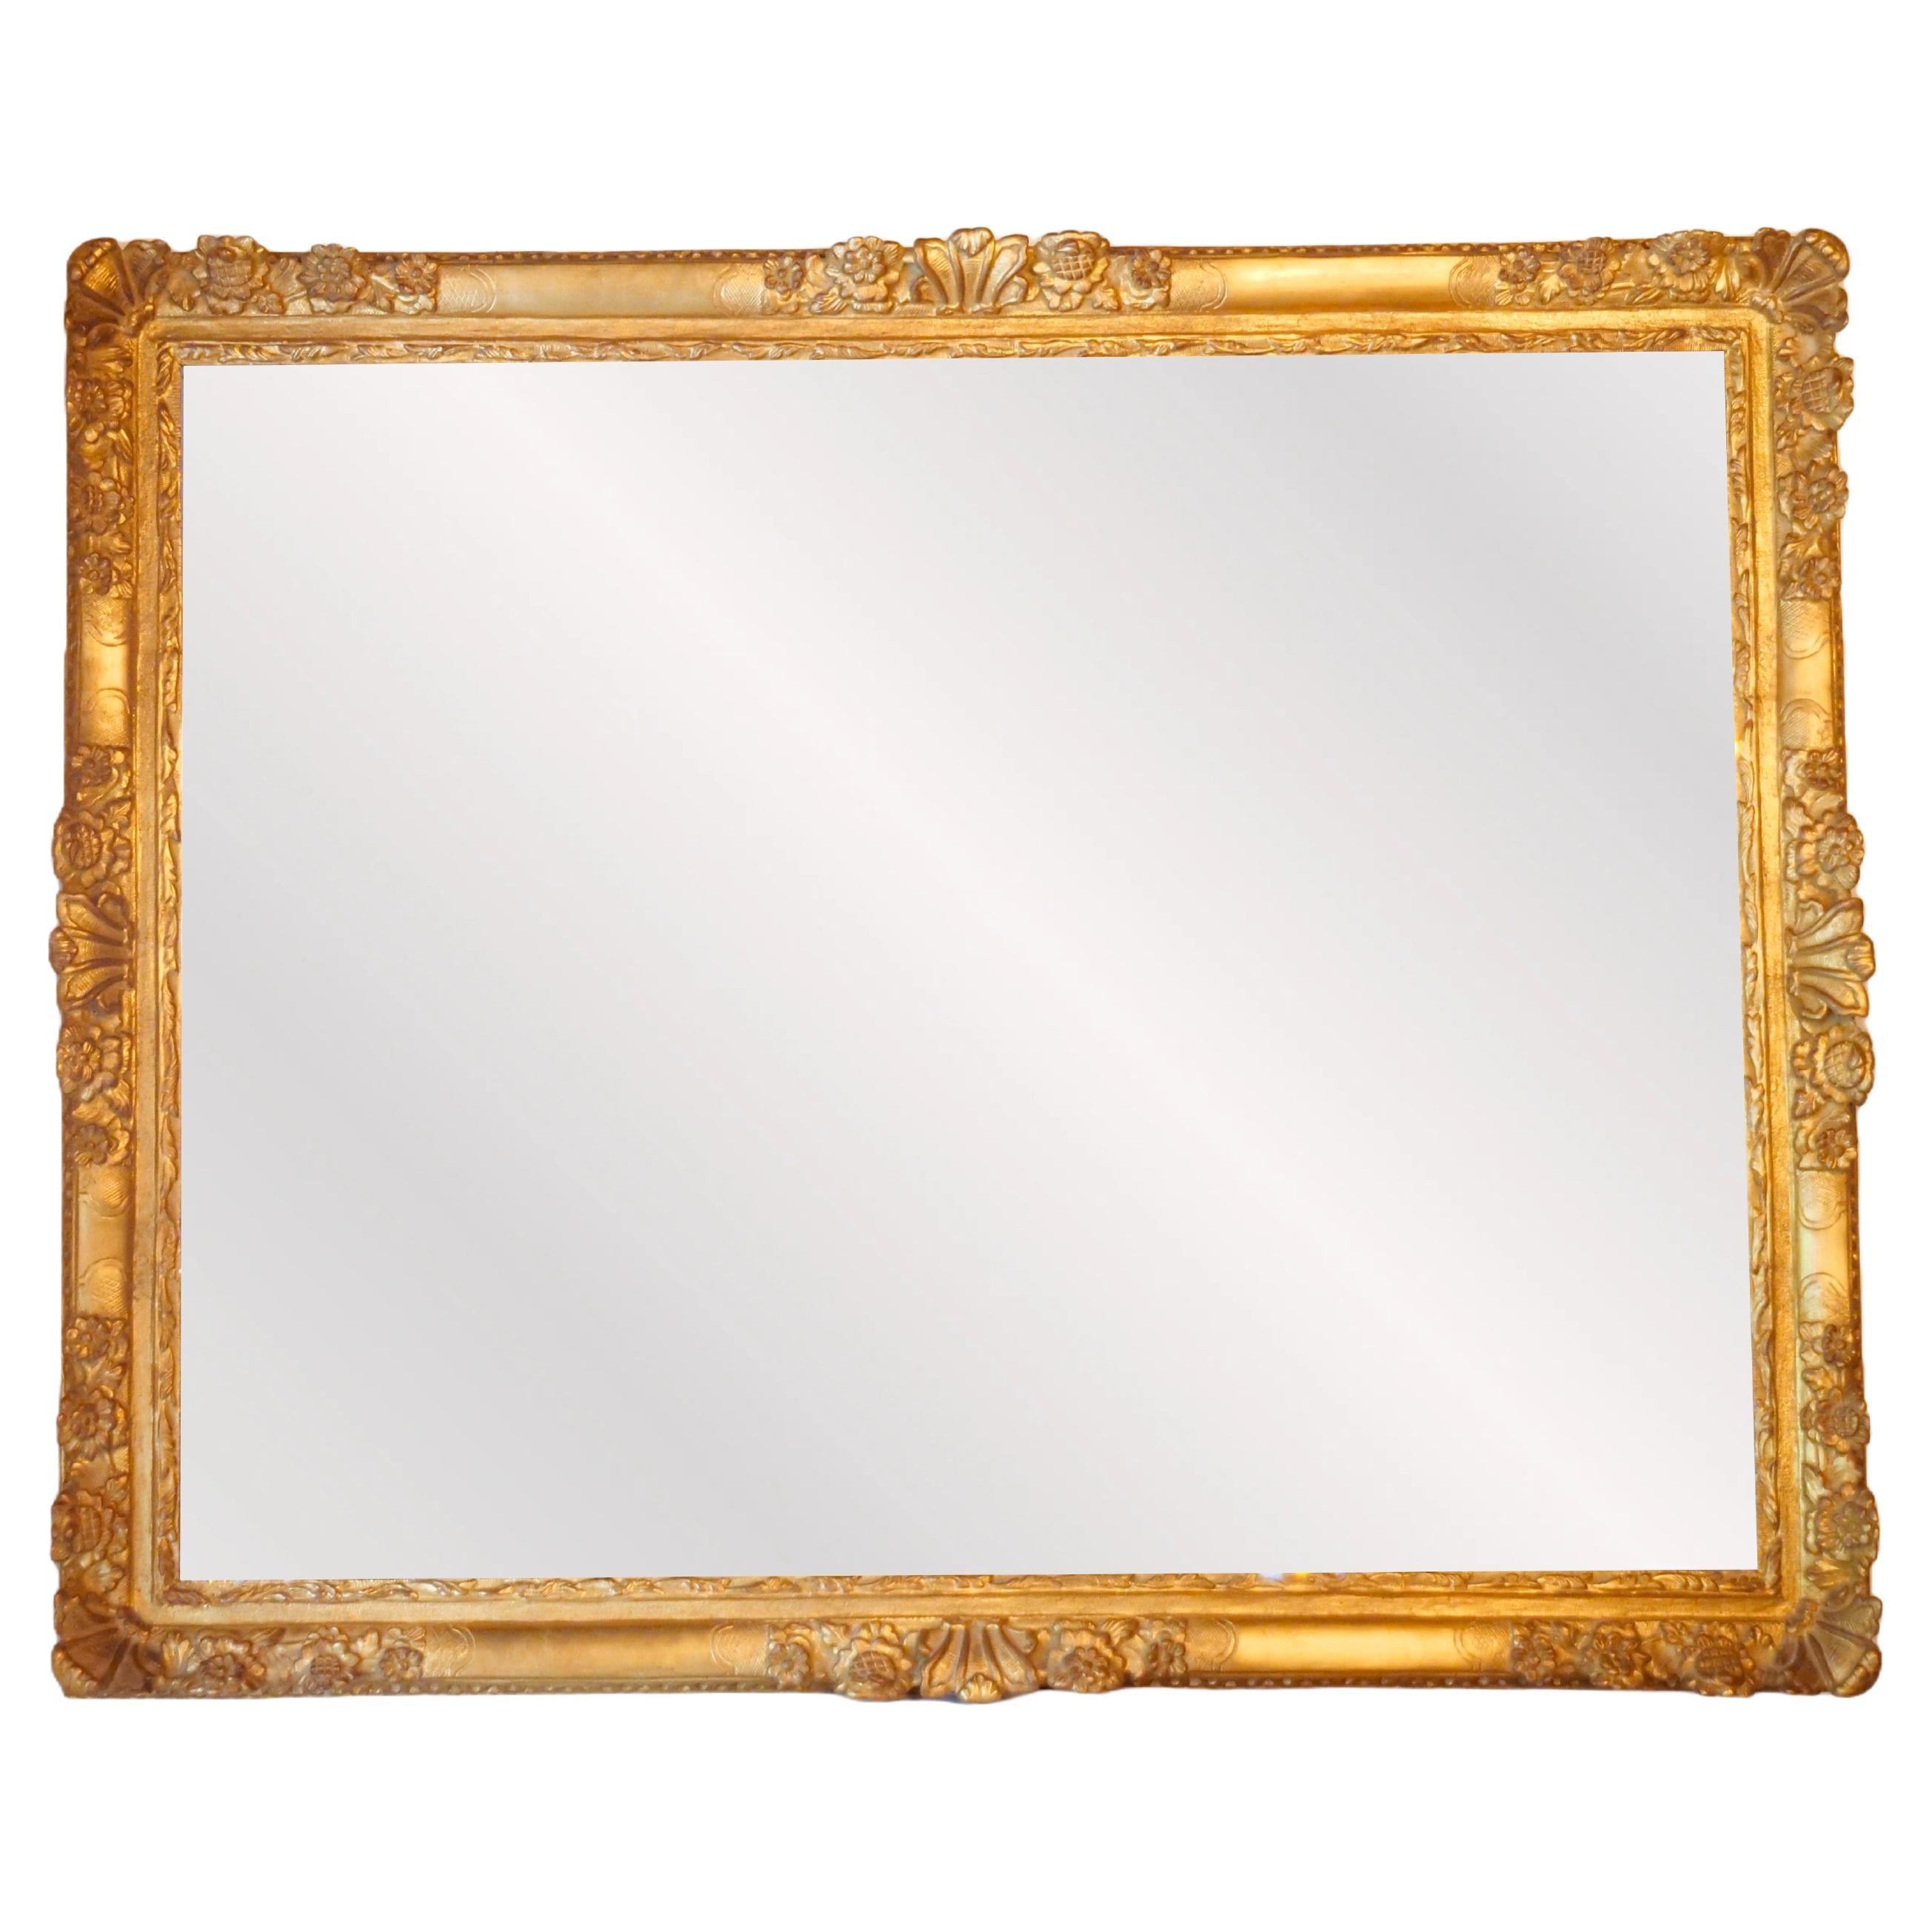 Exceptional French Giltwood Frame Rectangular Shape Hanging Wall Mirror